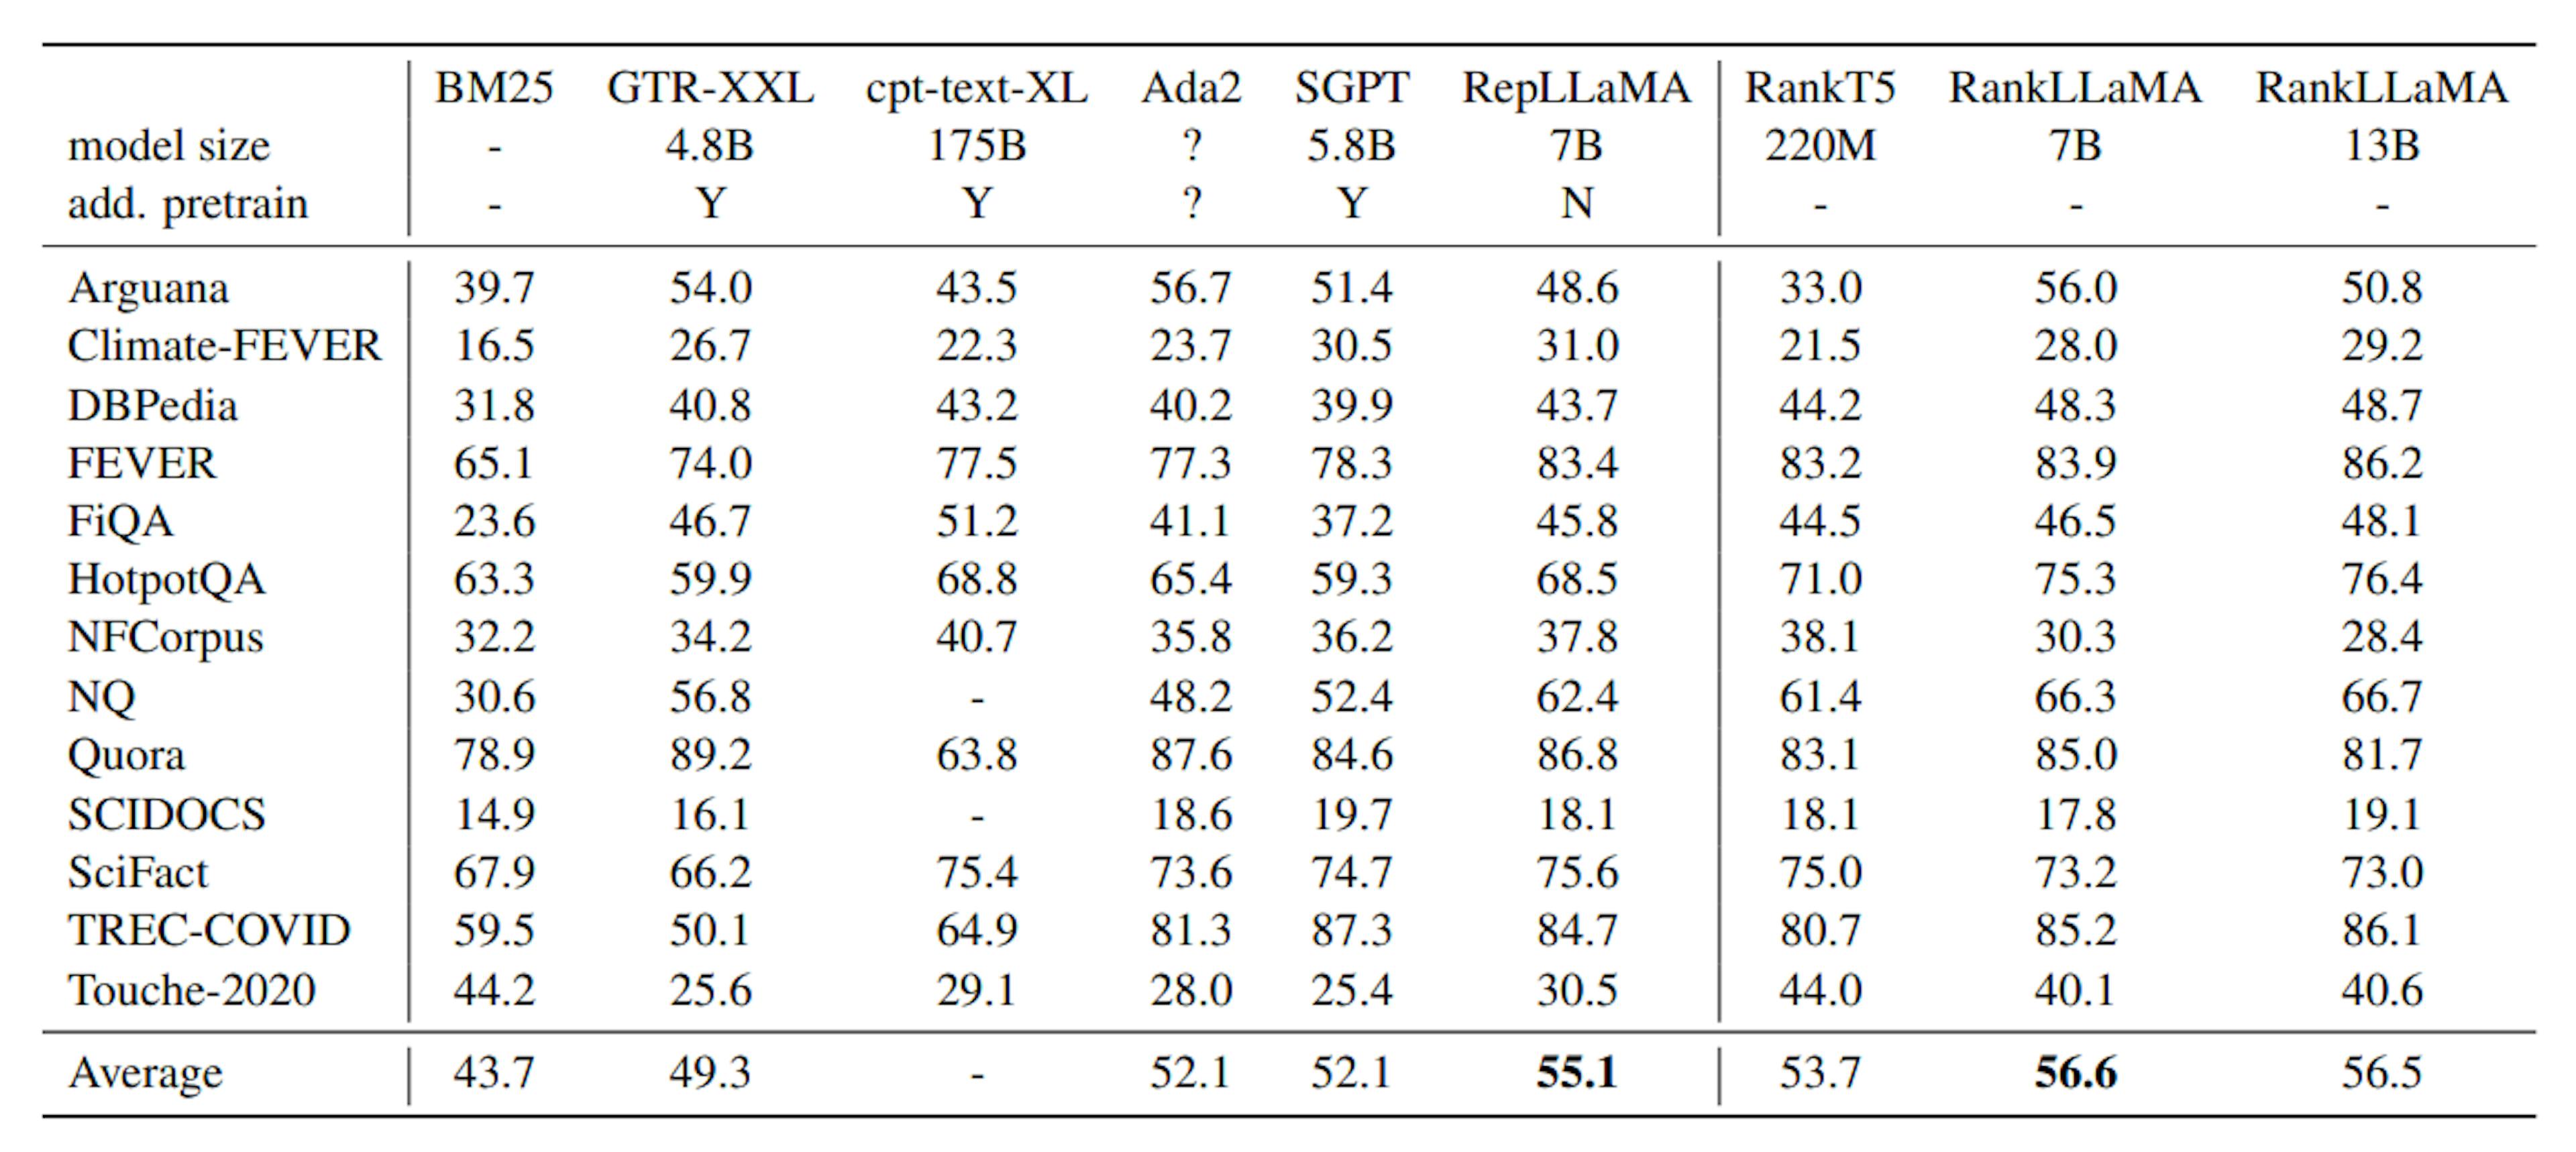 Table 2: Zero-shot effectiveness of RepLLaMA and RankLLaMA on BEIR datasets. The “add. pretrain” row indicates whether the retriever model has undergone additional contrastive pre-training before supervised fine-tuning. The zero-shot effectiveness numbers of Ada2 are taken from Kamalloo et al. (2023).